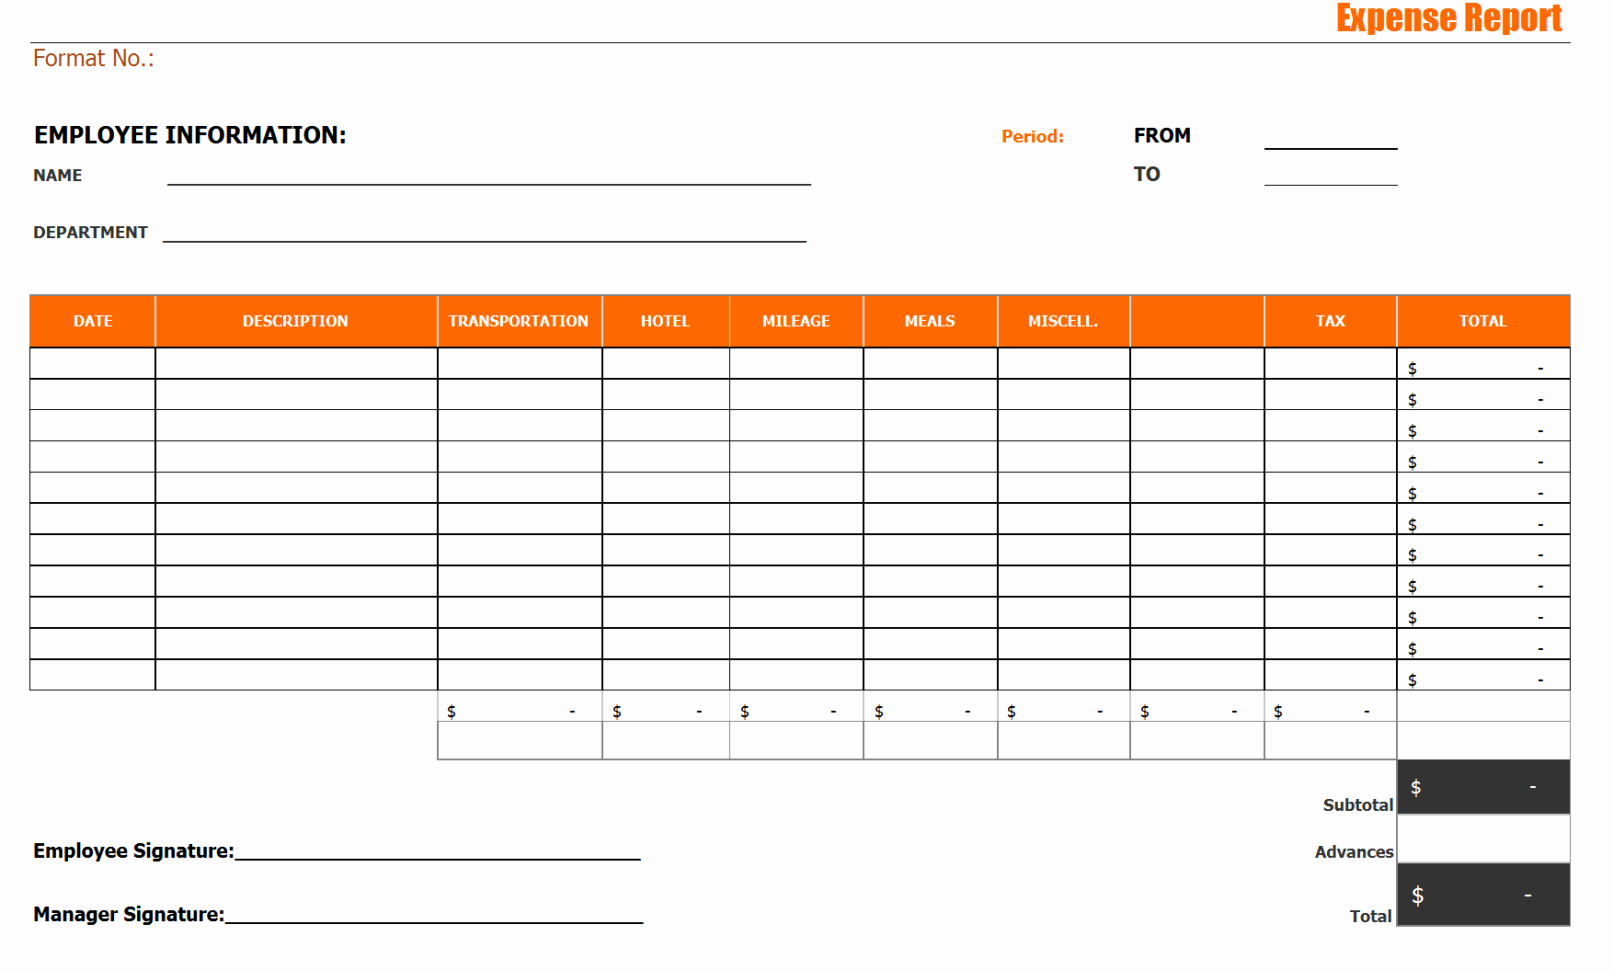 Expense Report Template Excel Beautiful Fice Expense Report Spreadsheet Templates for Busines